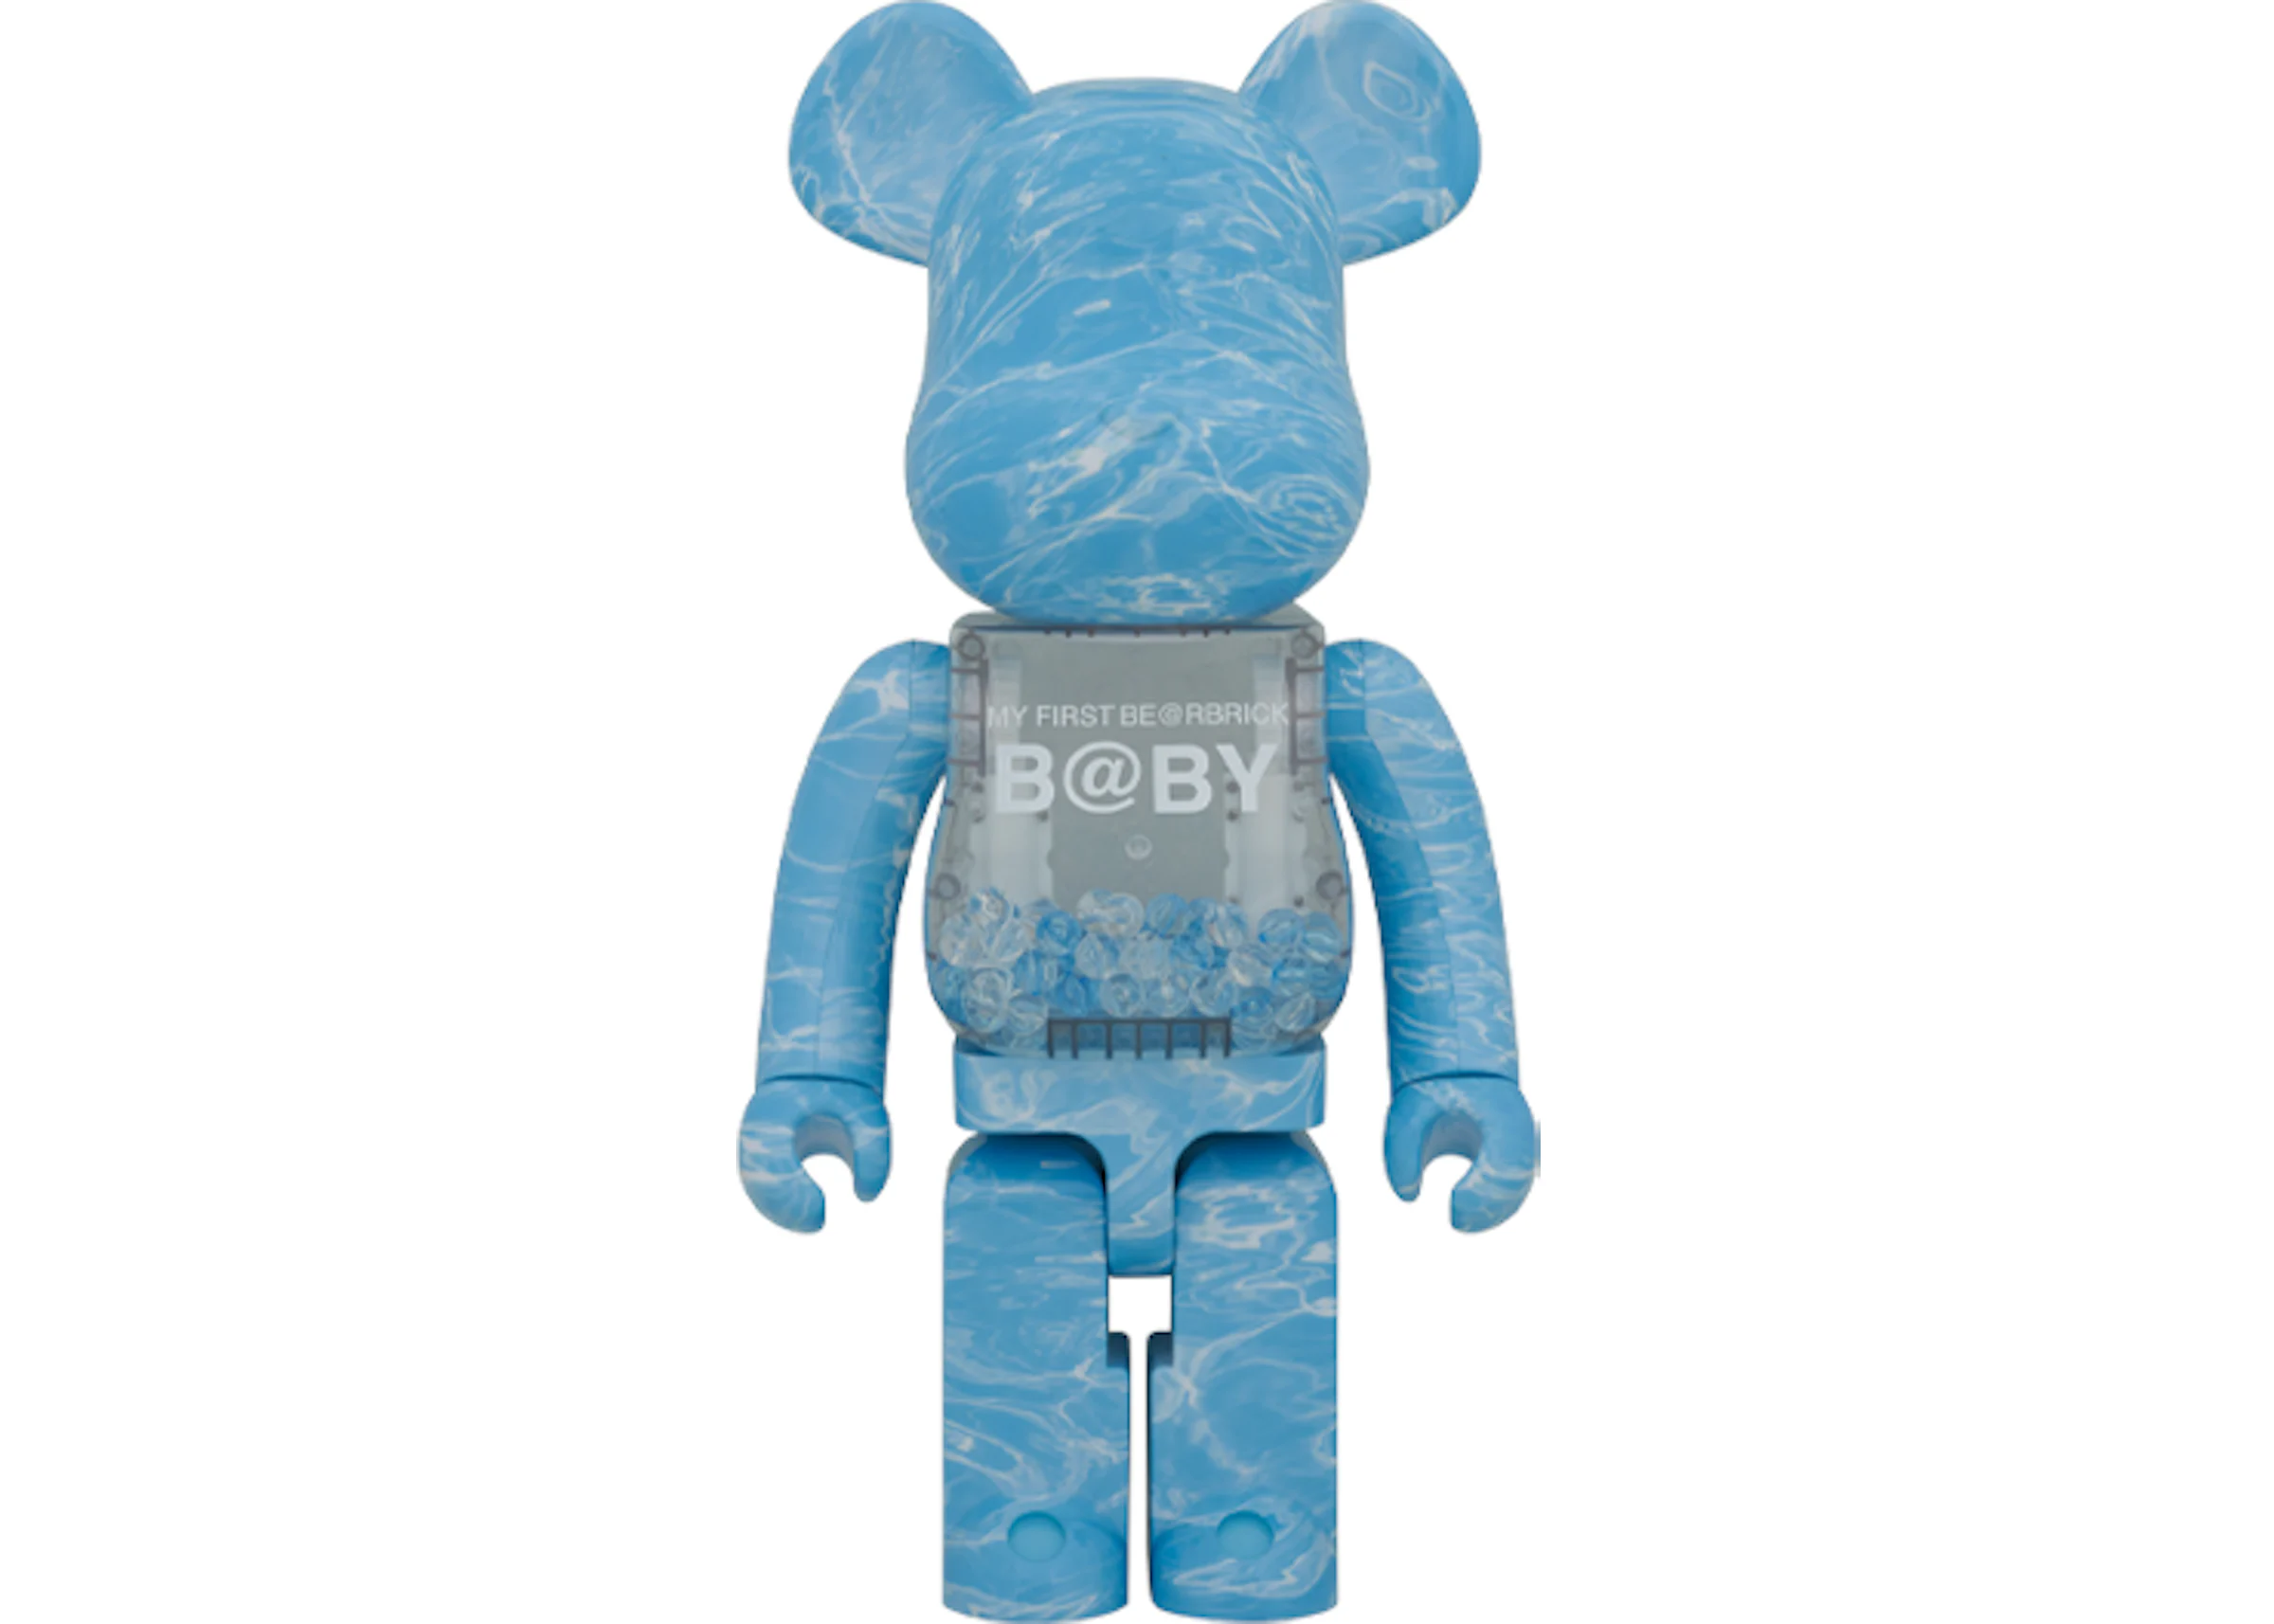 Bearbrick MY FIRST BE@RBRICK B@BY WATER CREST Ver. 1000% - US